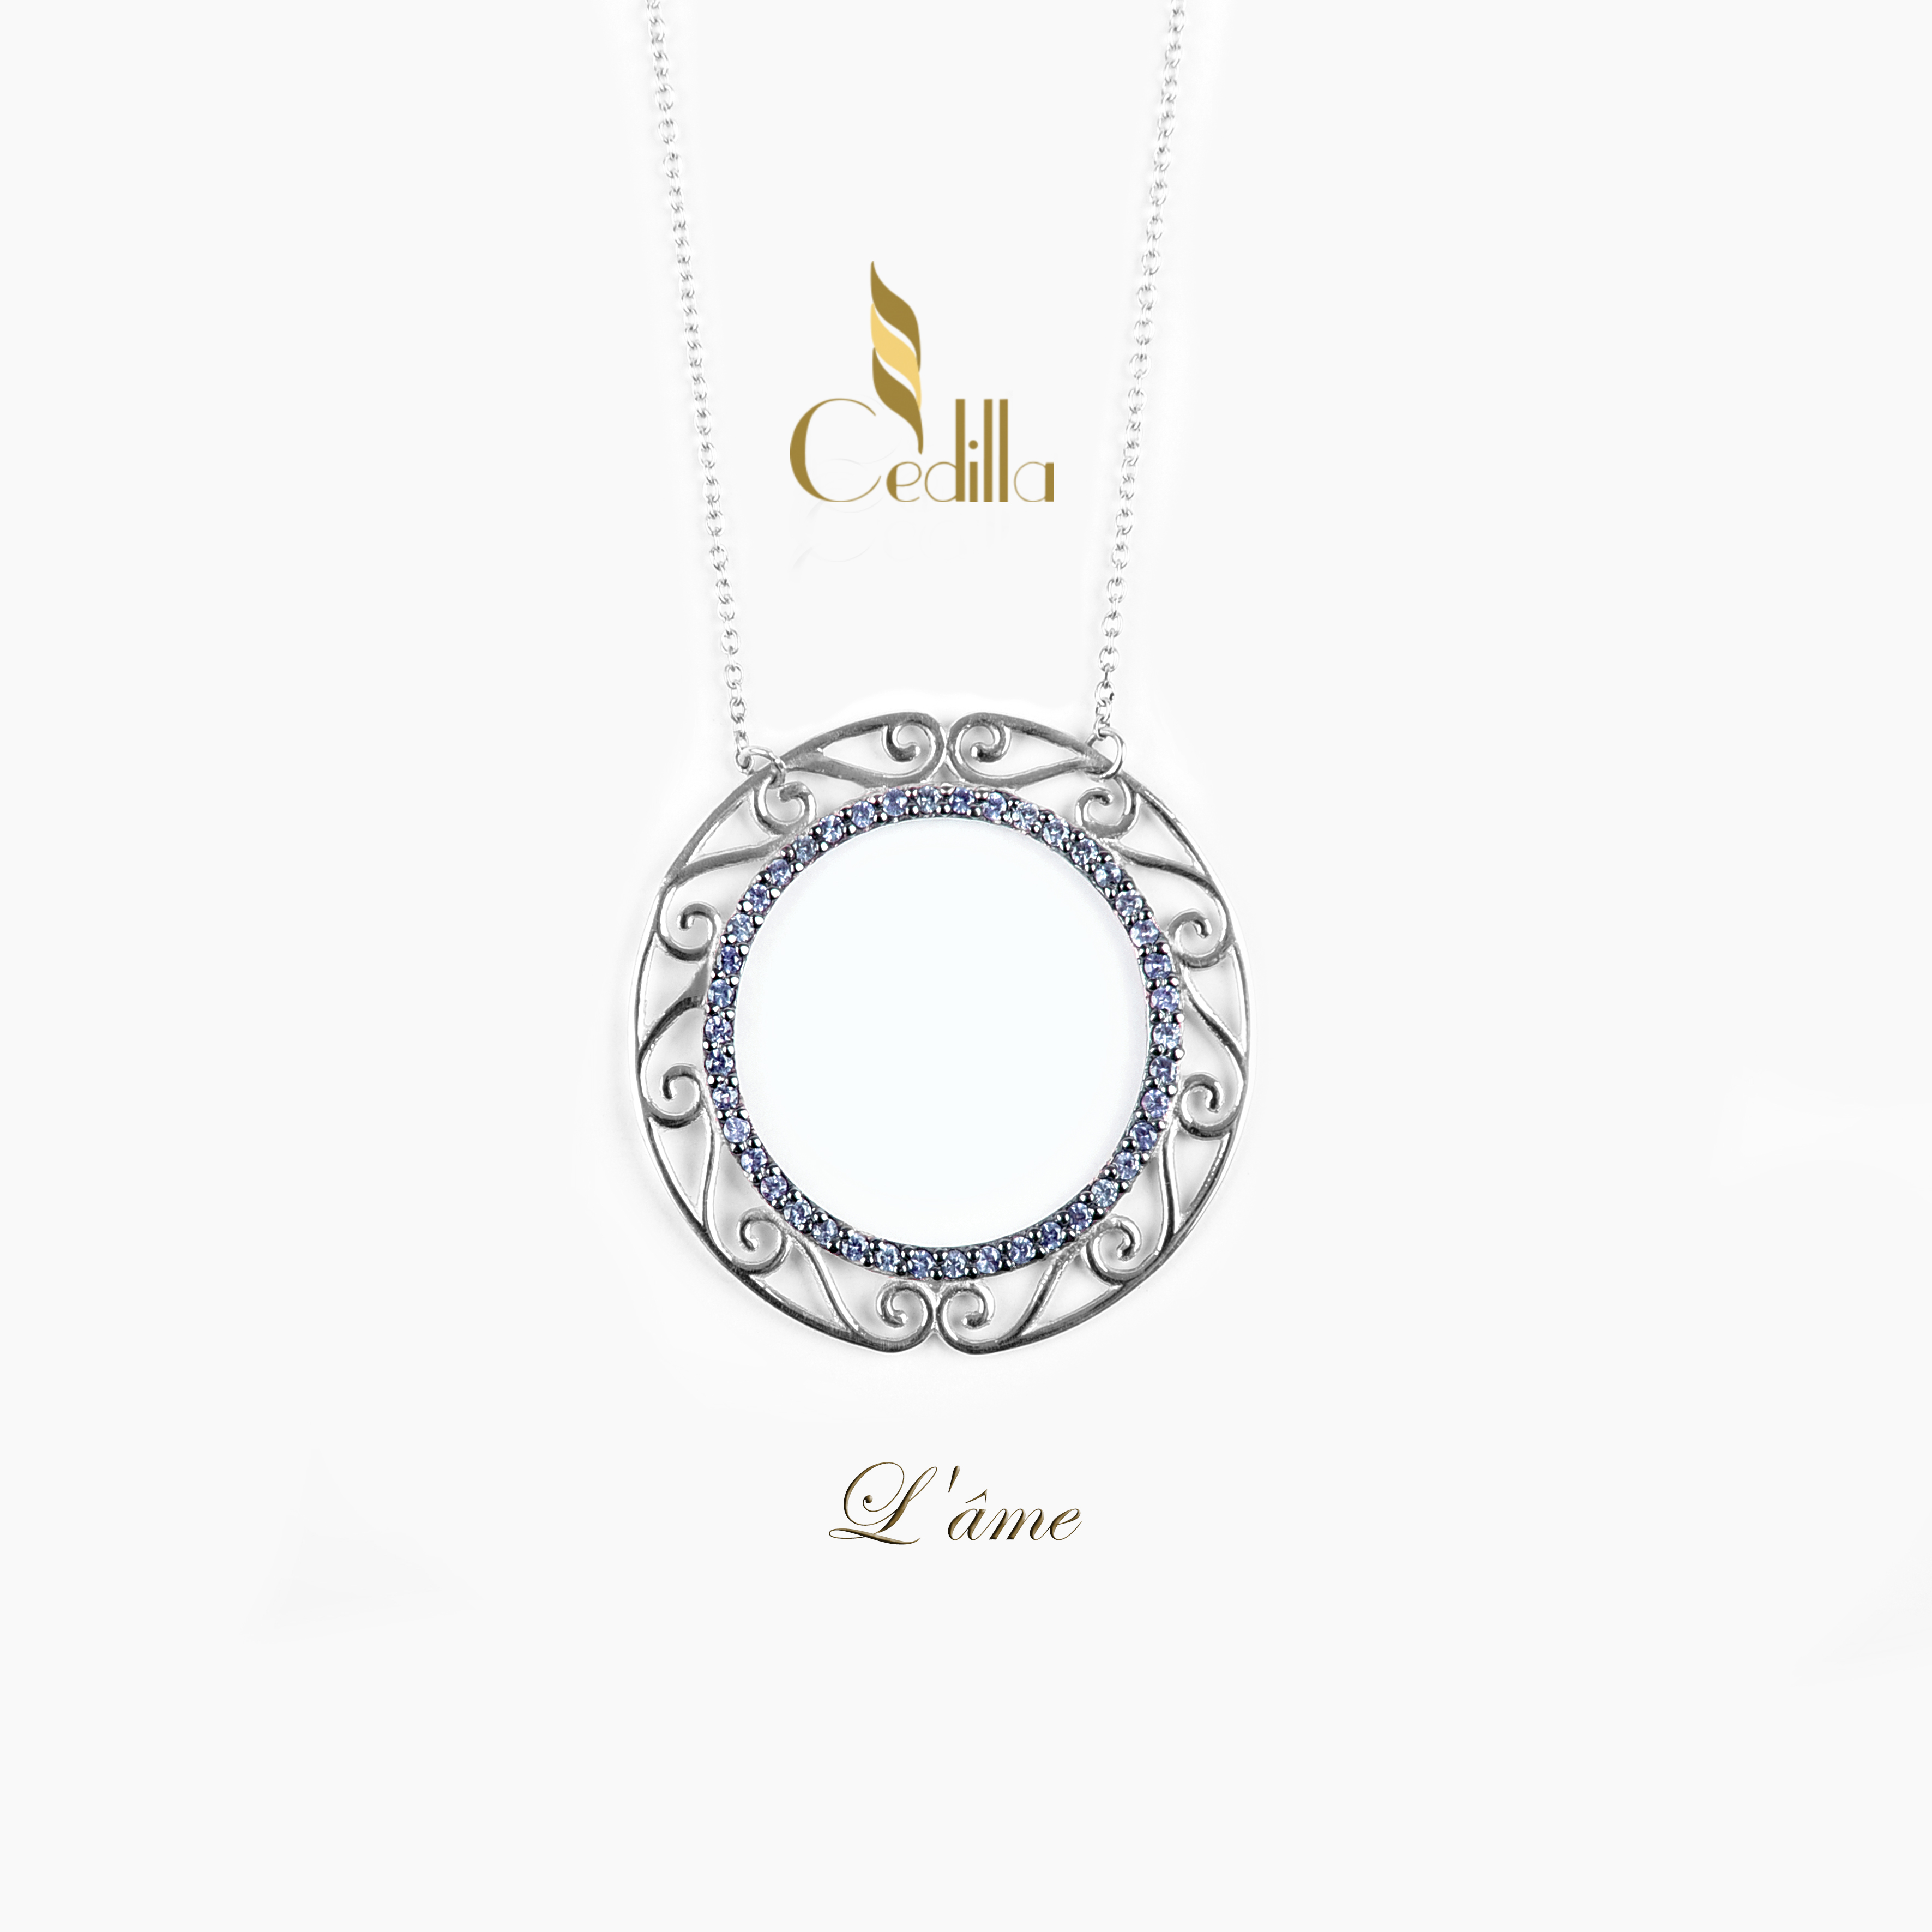 white gold necklace, gold chain for ladies, white gold necklace, 18k yellow gold, 18k yellow gold chain, 18k yellow gold chain necklace, 18k yellow gold pendant, 18k gold chain, 18k gold, 18k white gold chain, yellow gold pendant necklace, 18k gold chain for ladies, 18k gold necklace sets with price in dubai, 18k gold necklace price in uae, customized gold necklace, Pink Gold 18 karat, White Gold 18 karat, yellow gold necklace, 18k yellow gold, gold chain